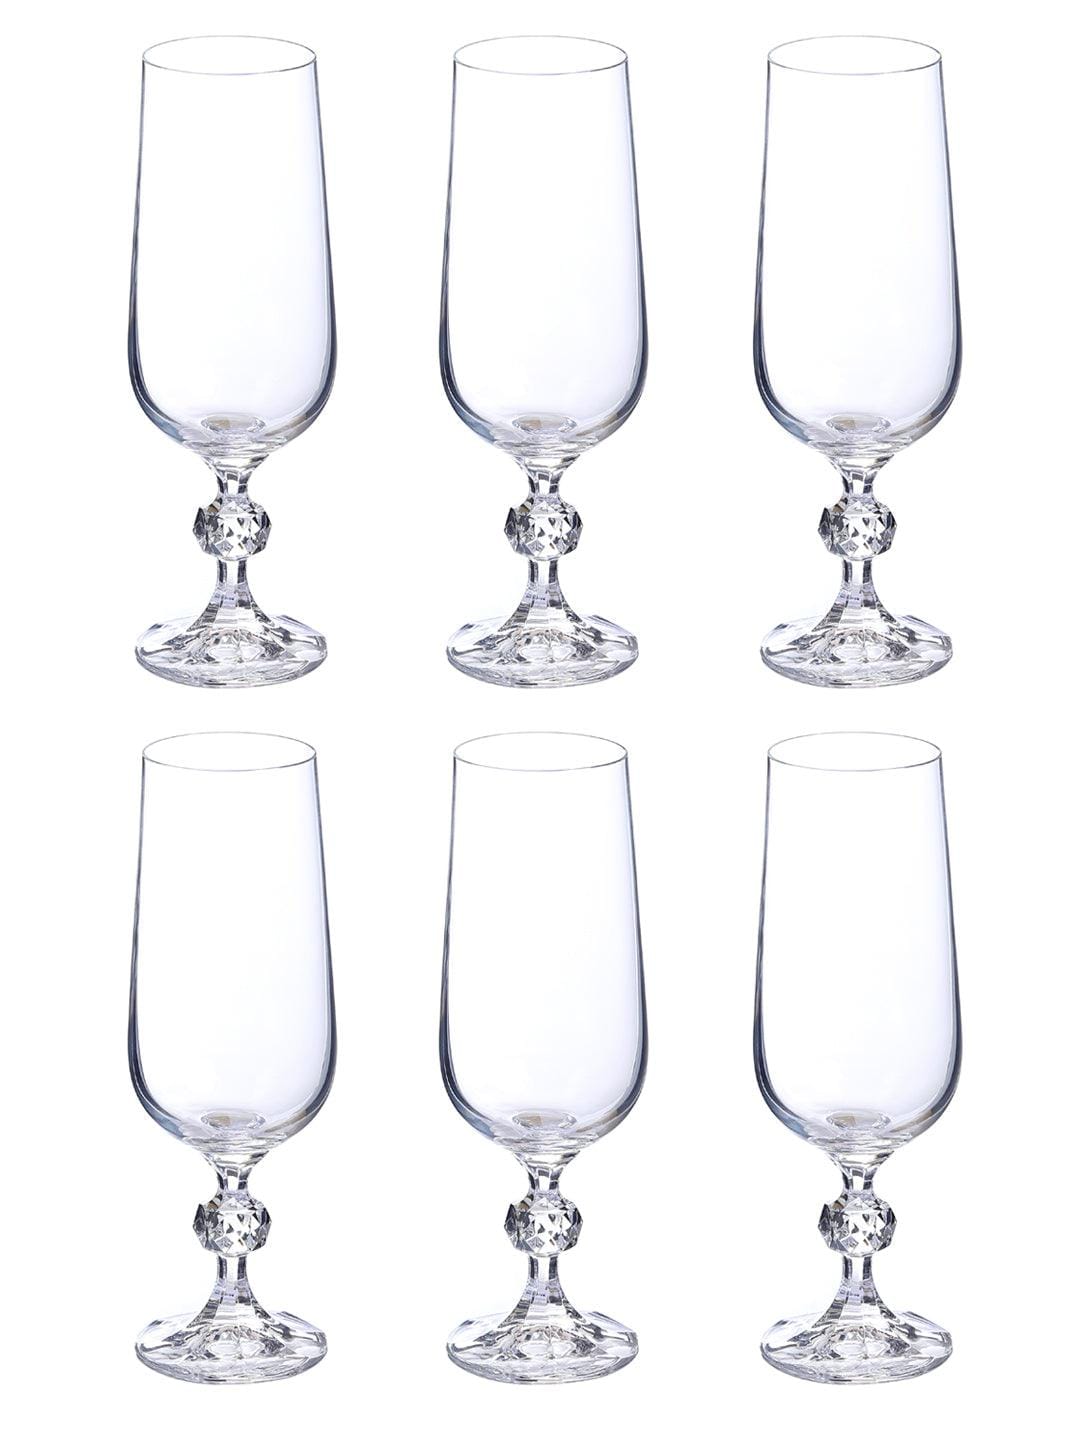 Bohemia Crystal Claudia Champagne Flute Drinking Glass 180ml Set of 6 pcs, Tranparent, Non Lead Crystal | Champagne Flute